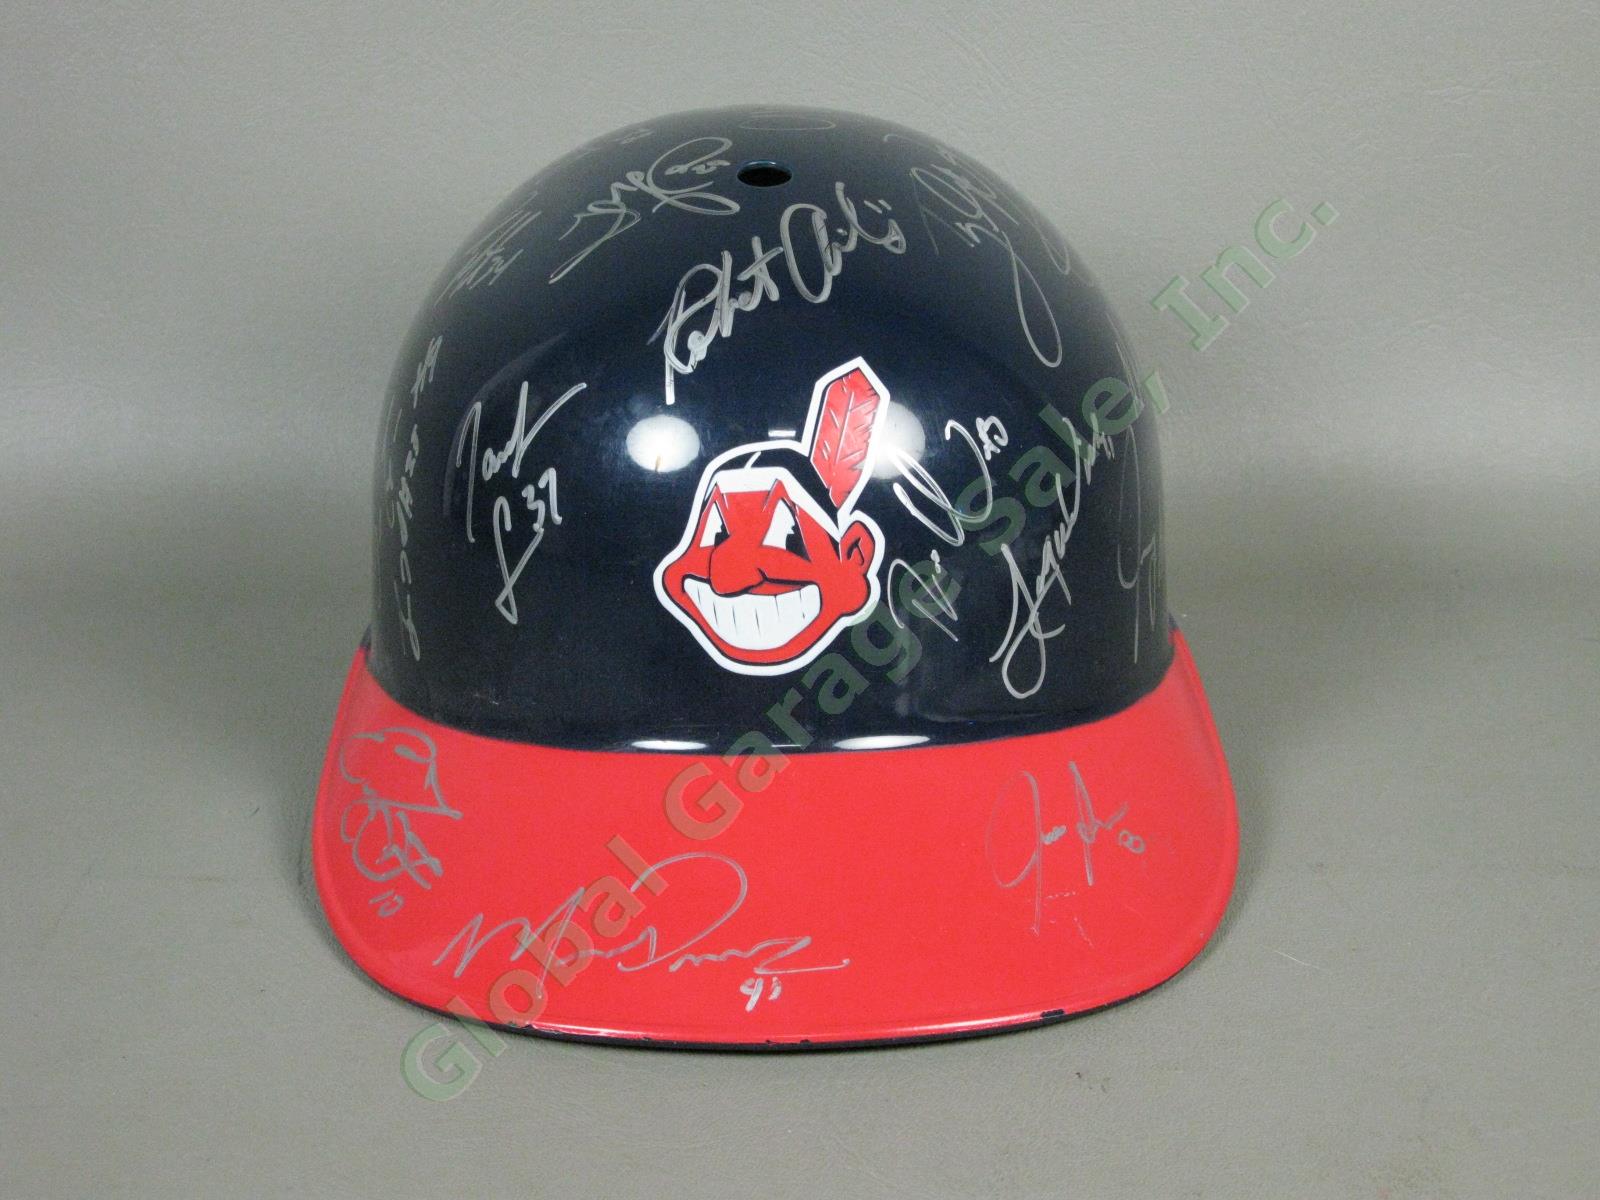 2012 Mahoning Valley Scrappers Team Signed Baseball Helmet Cleveland Indians NR